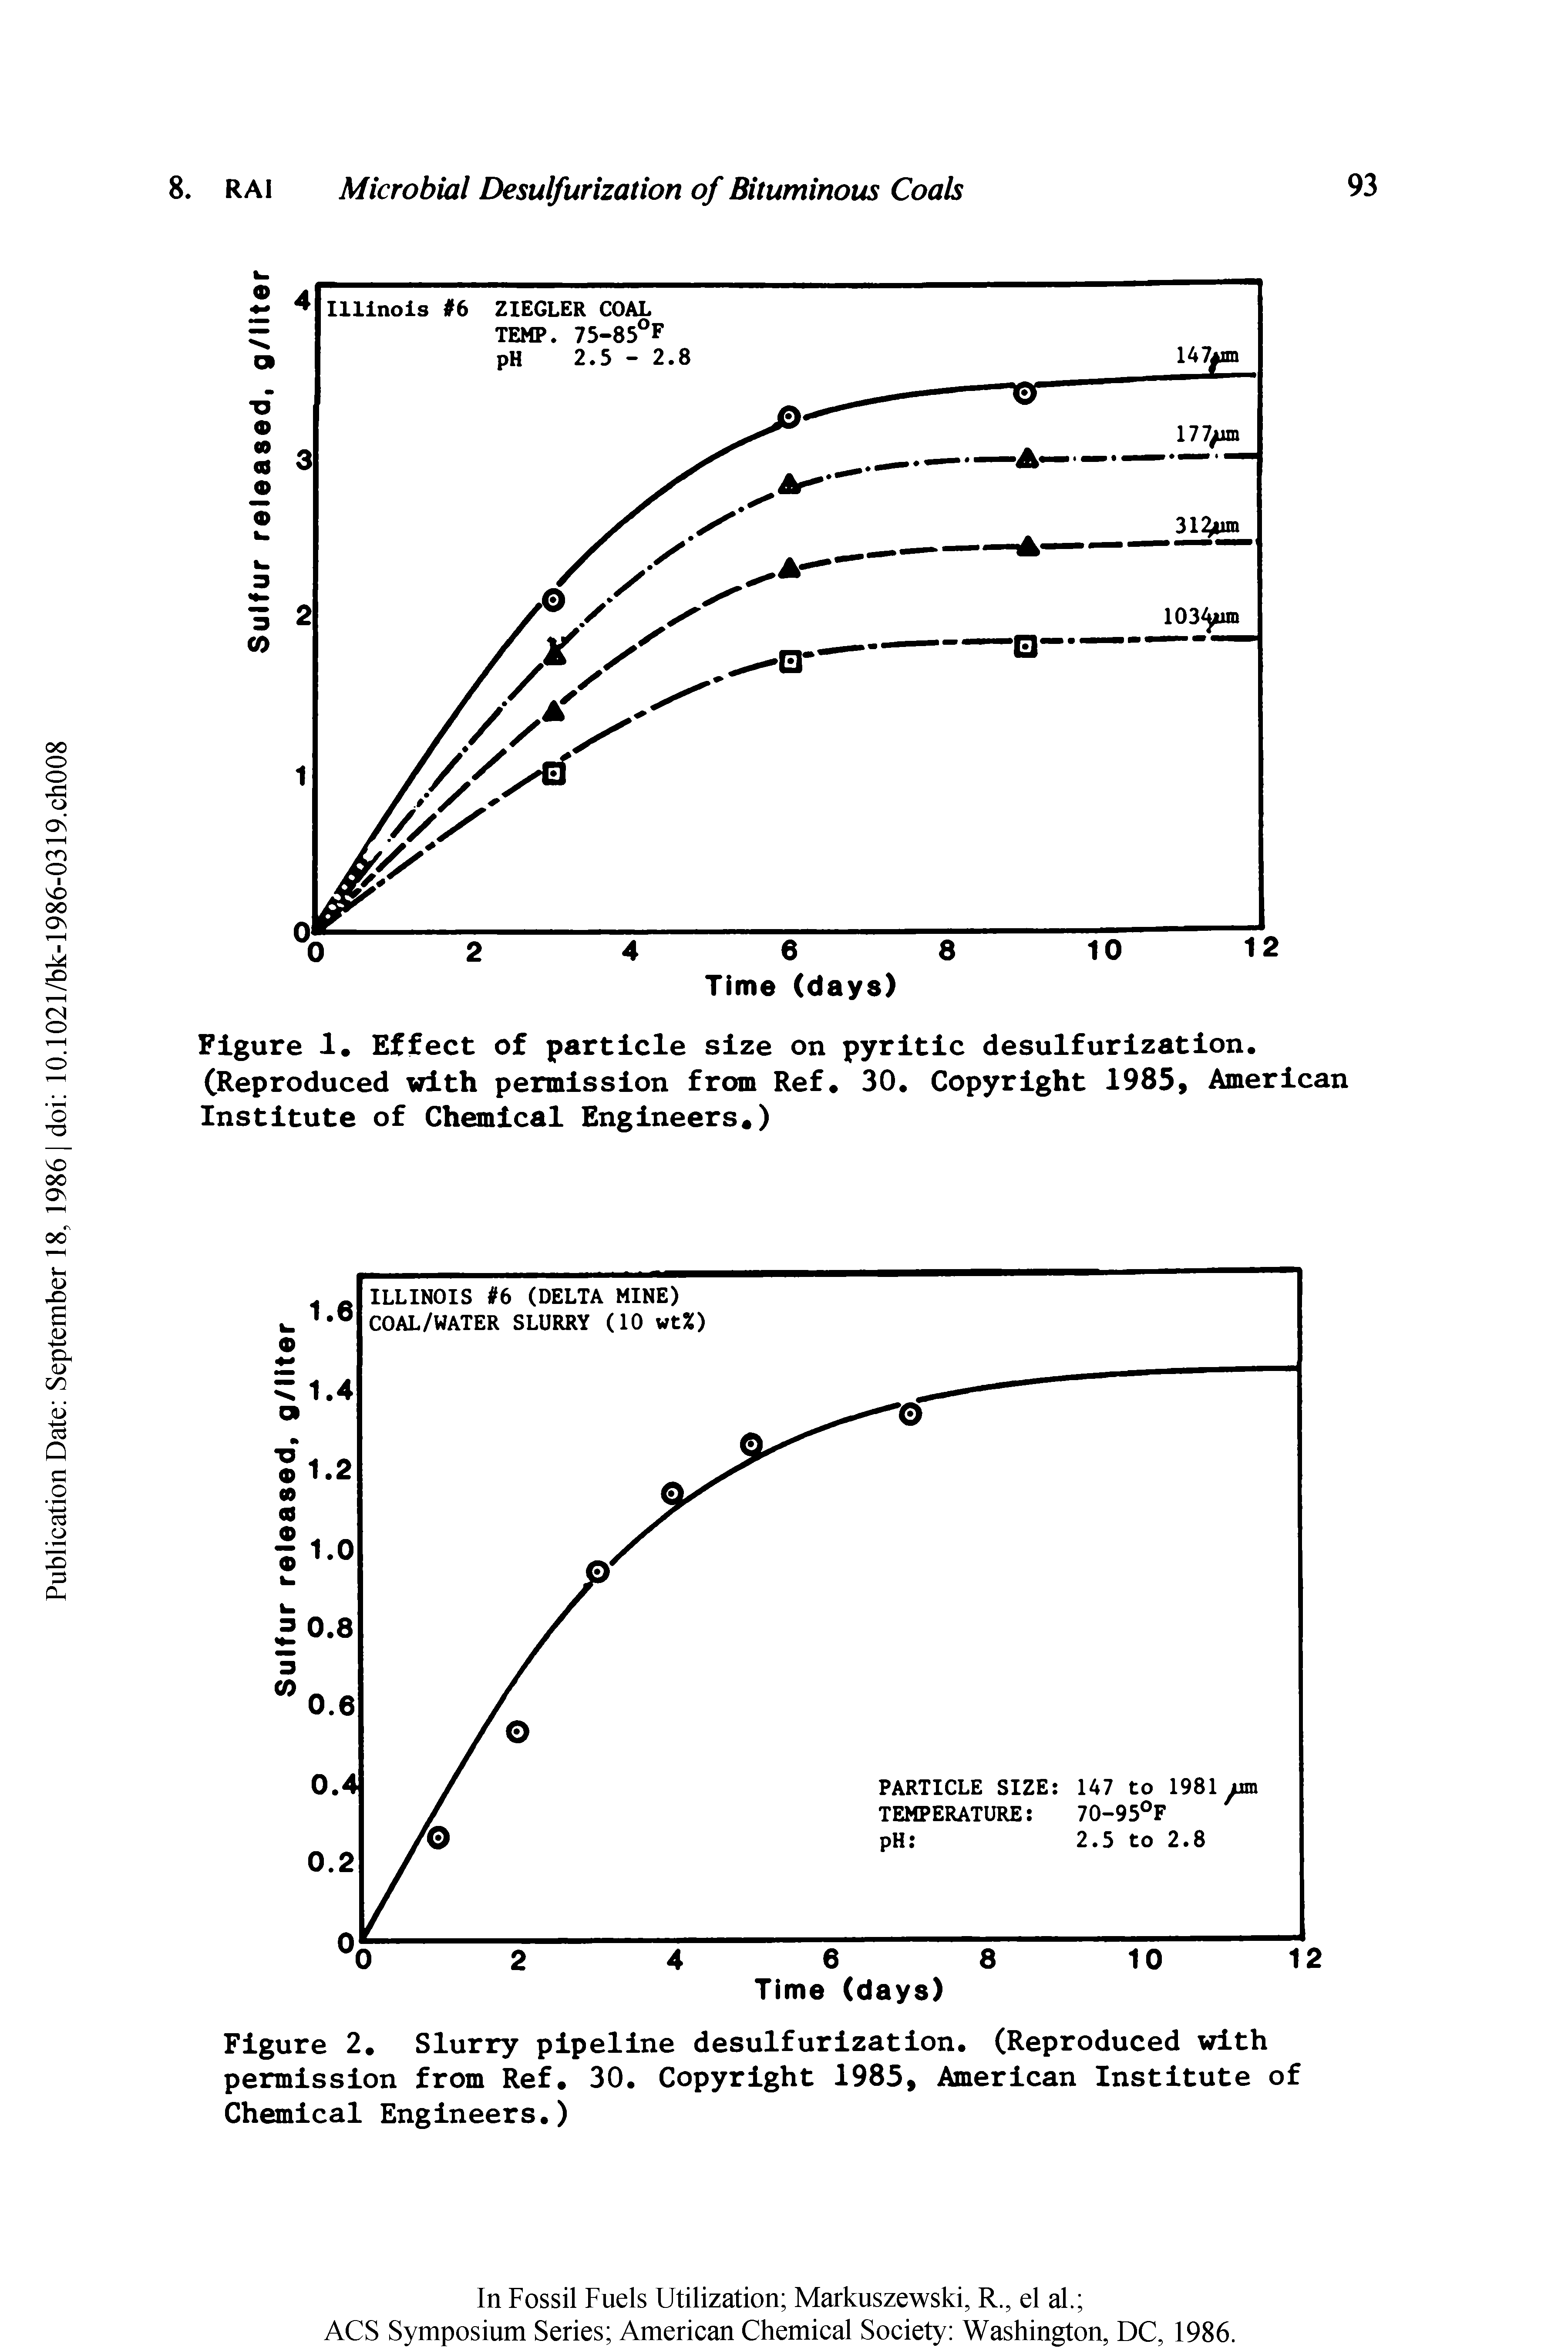 Figure 2. Slurry pipeline desulfurization. (Reproduced with permission from Ref. 30. Copyright 1985, American Institute of Chemical Engineers.)...